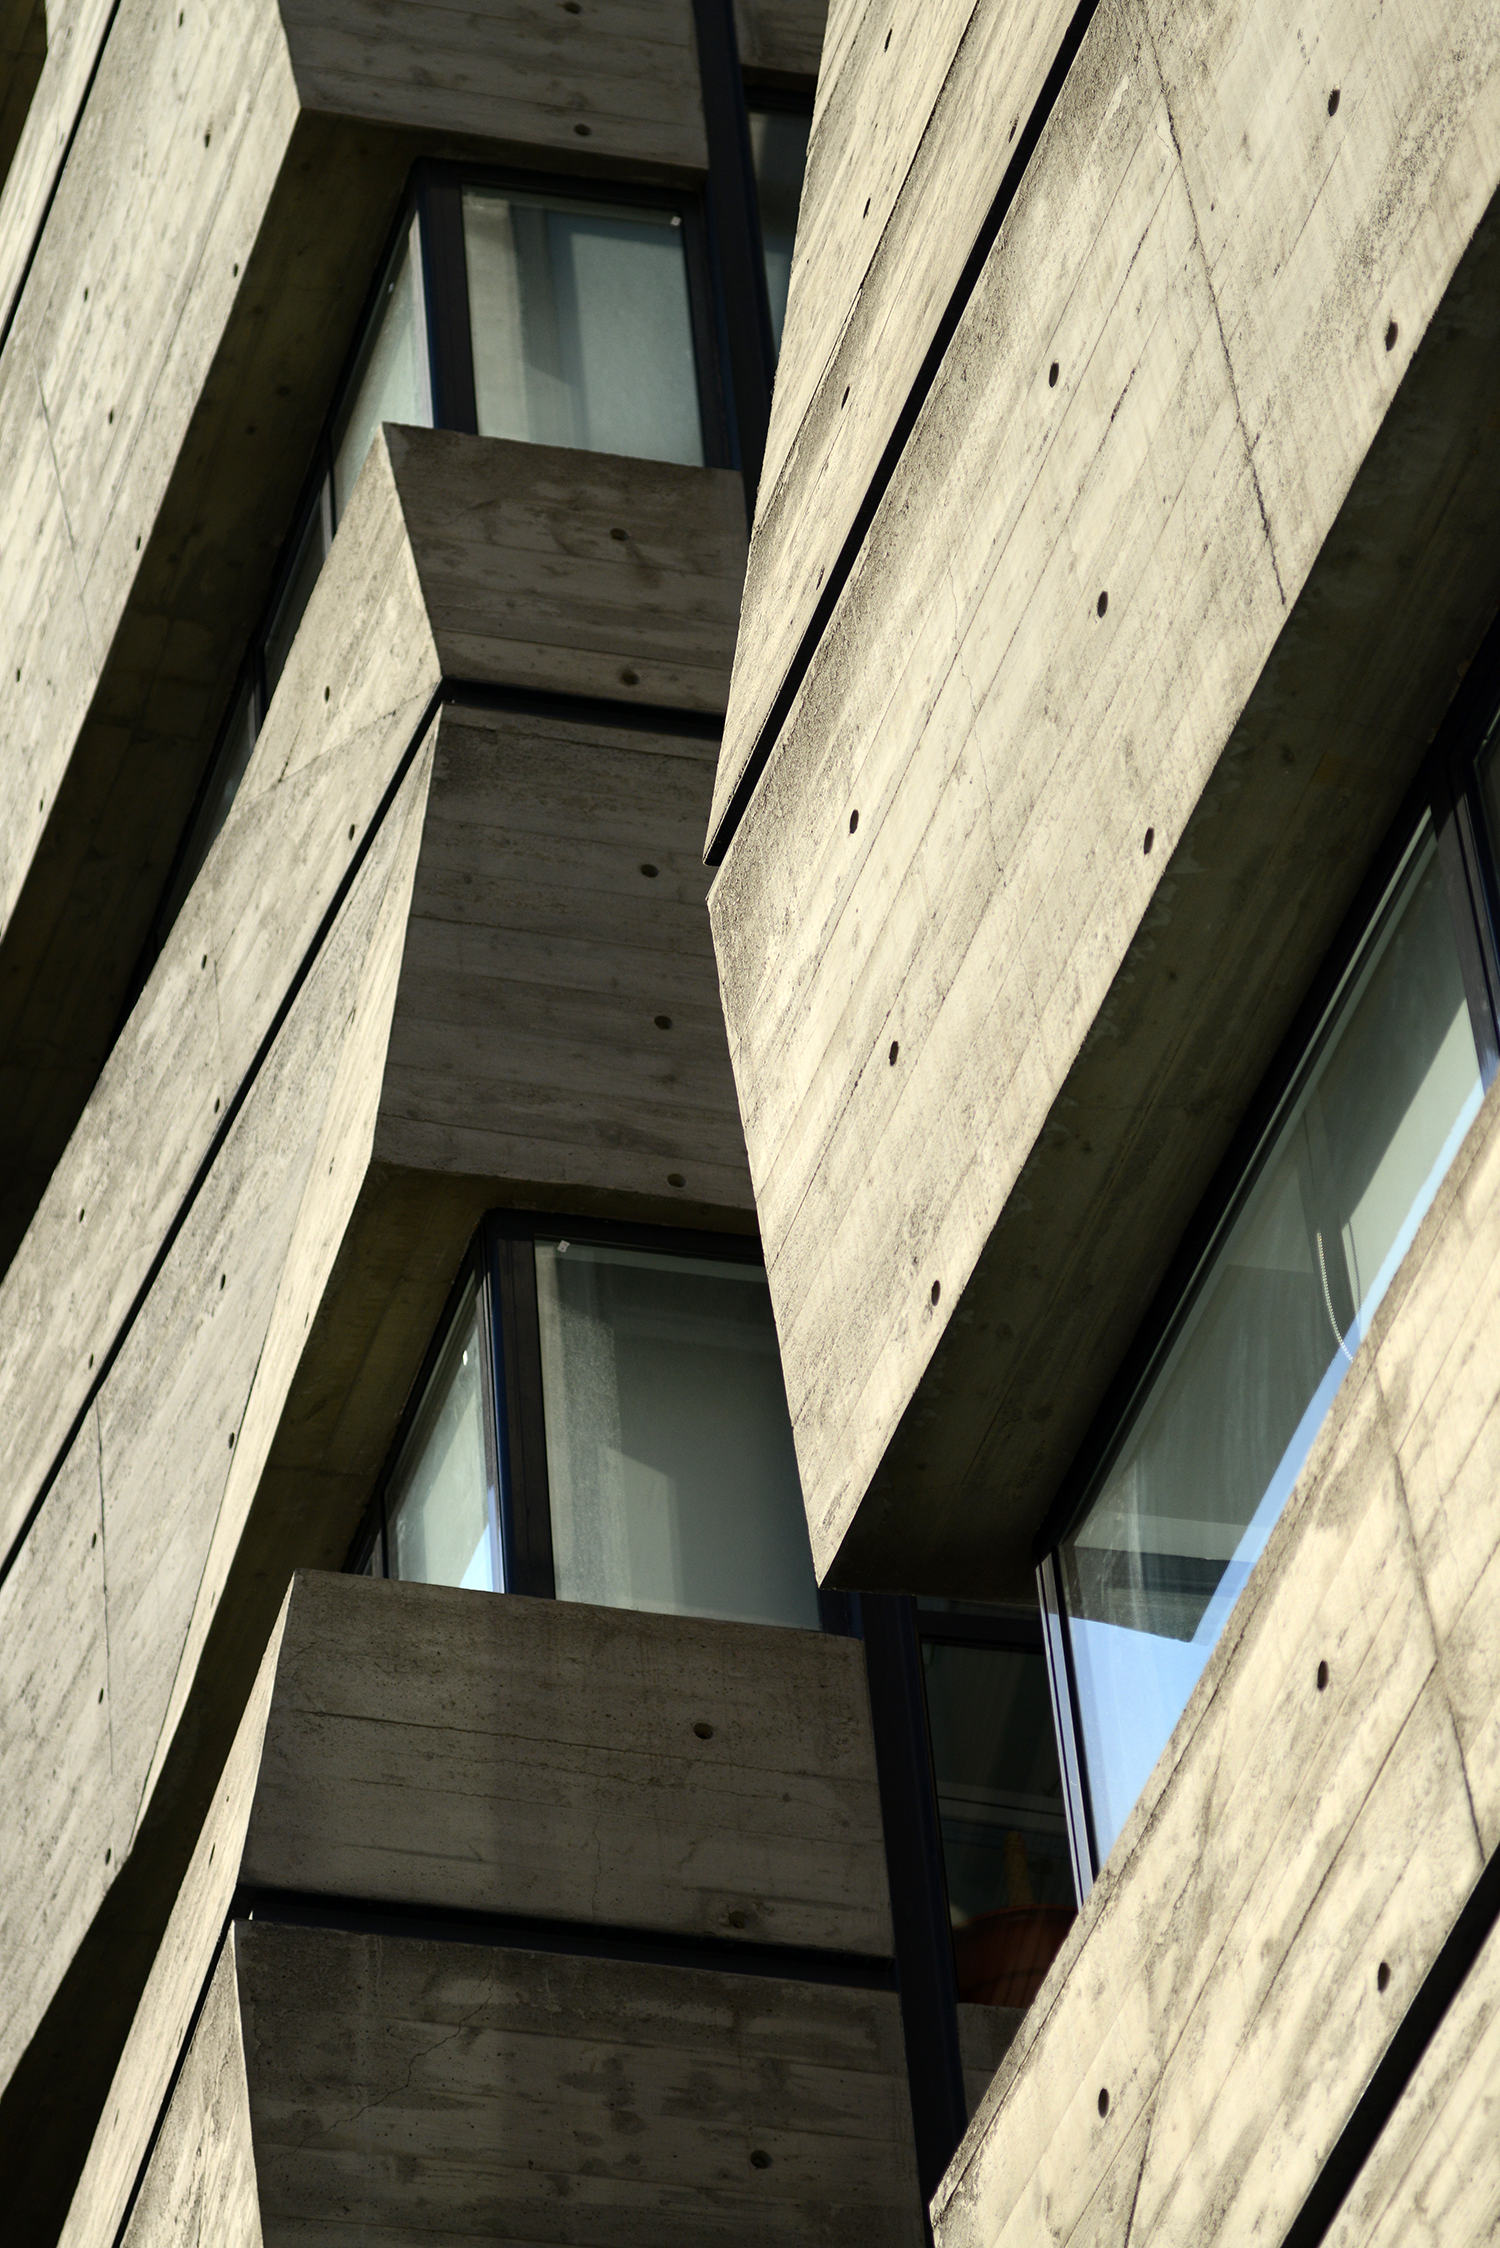 The concrete is used for the structure and the finished facades